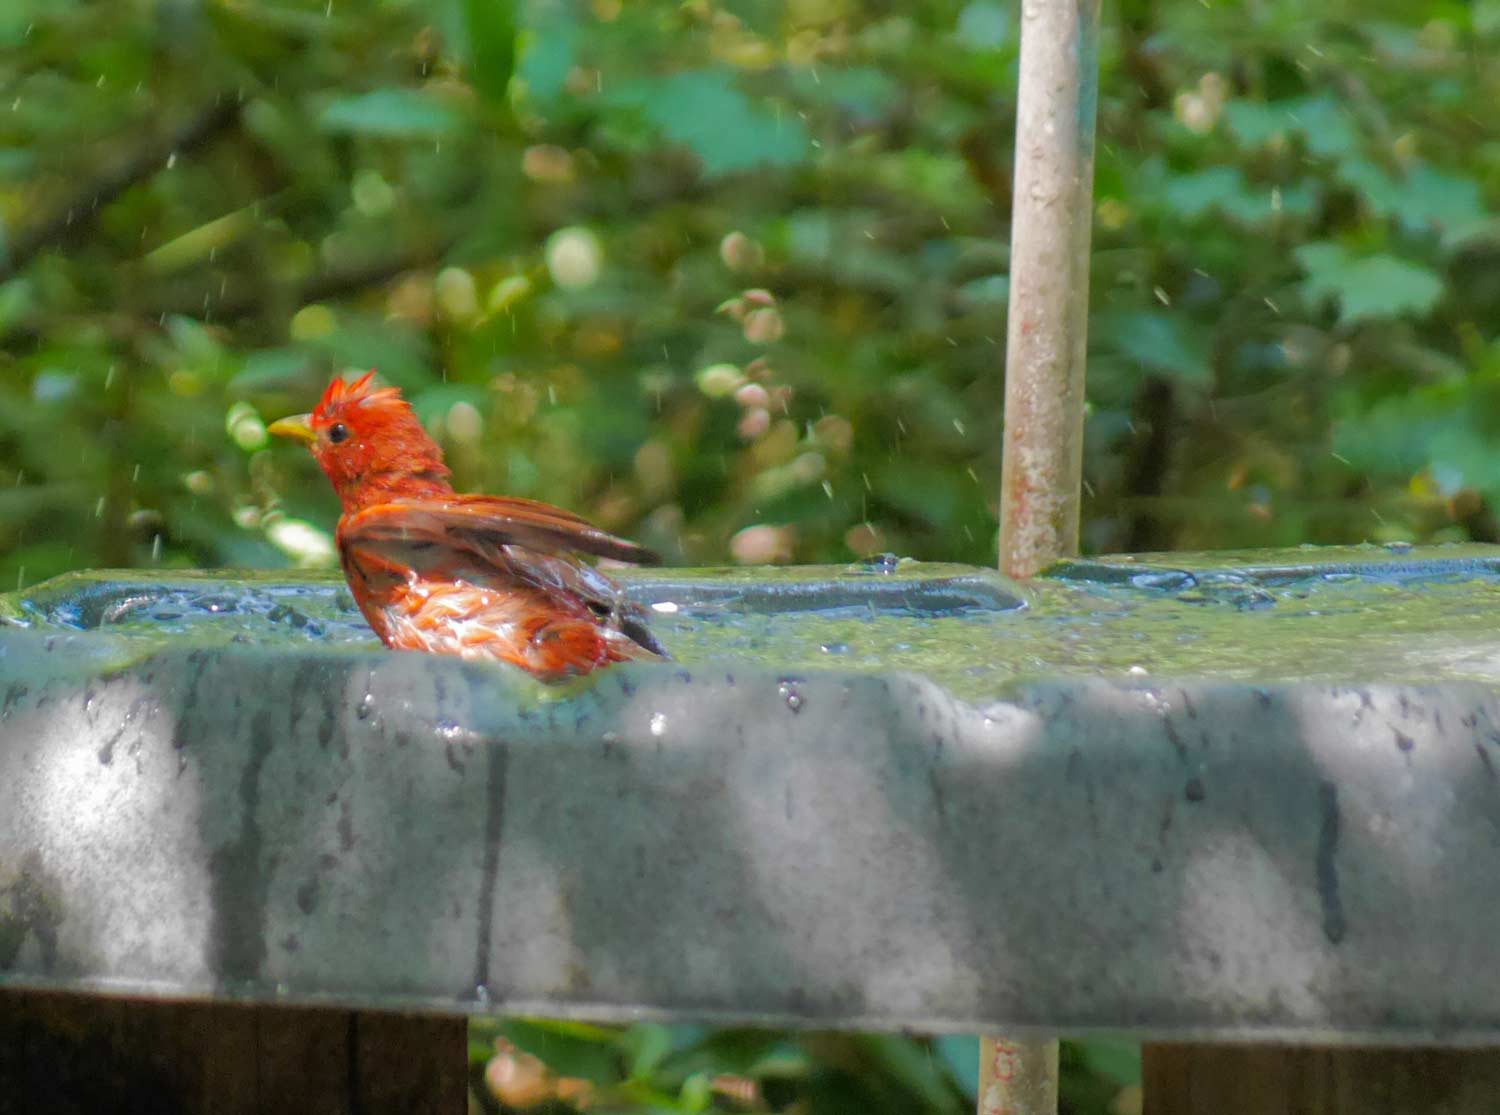 Red summer tanager bathing in a bird bath